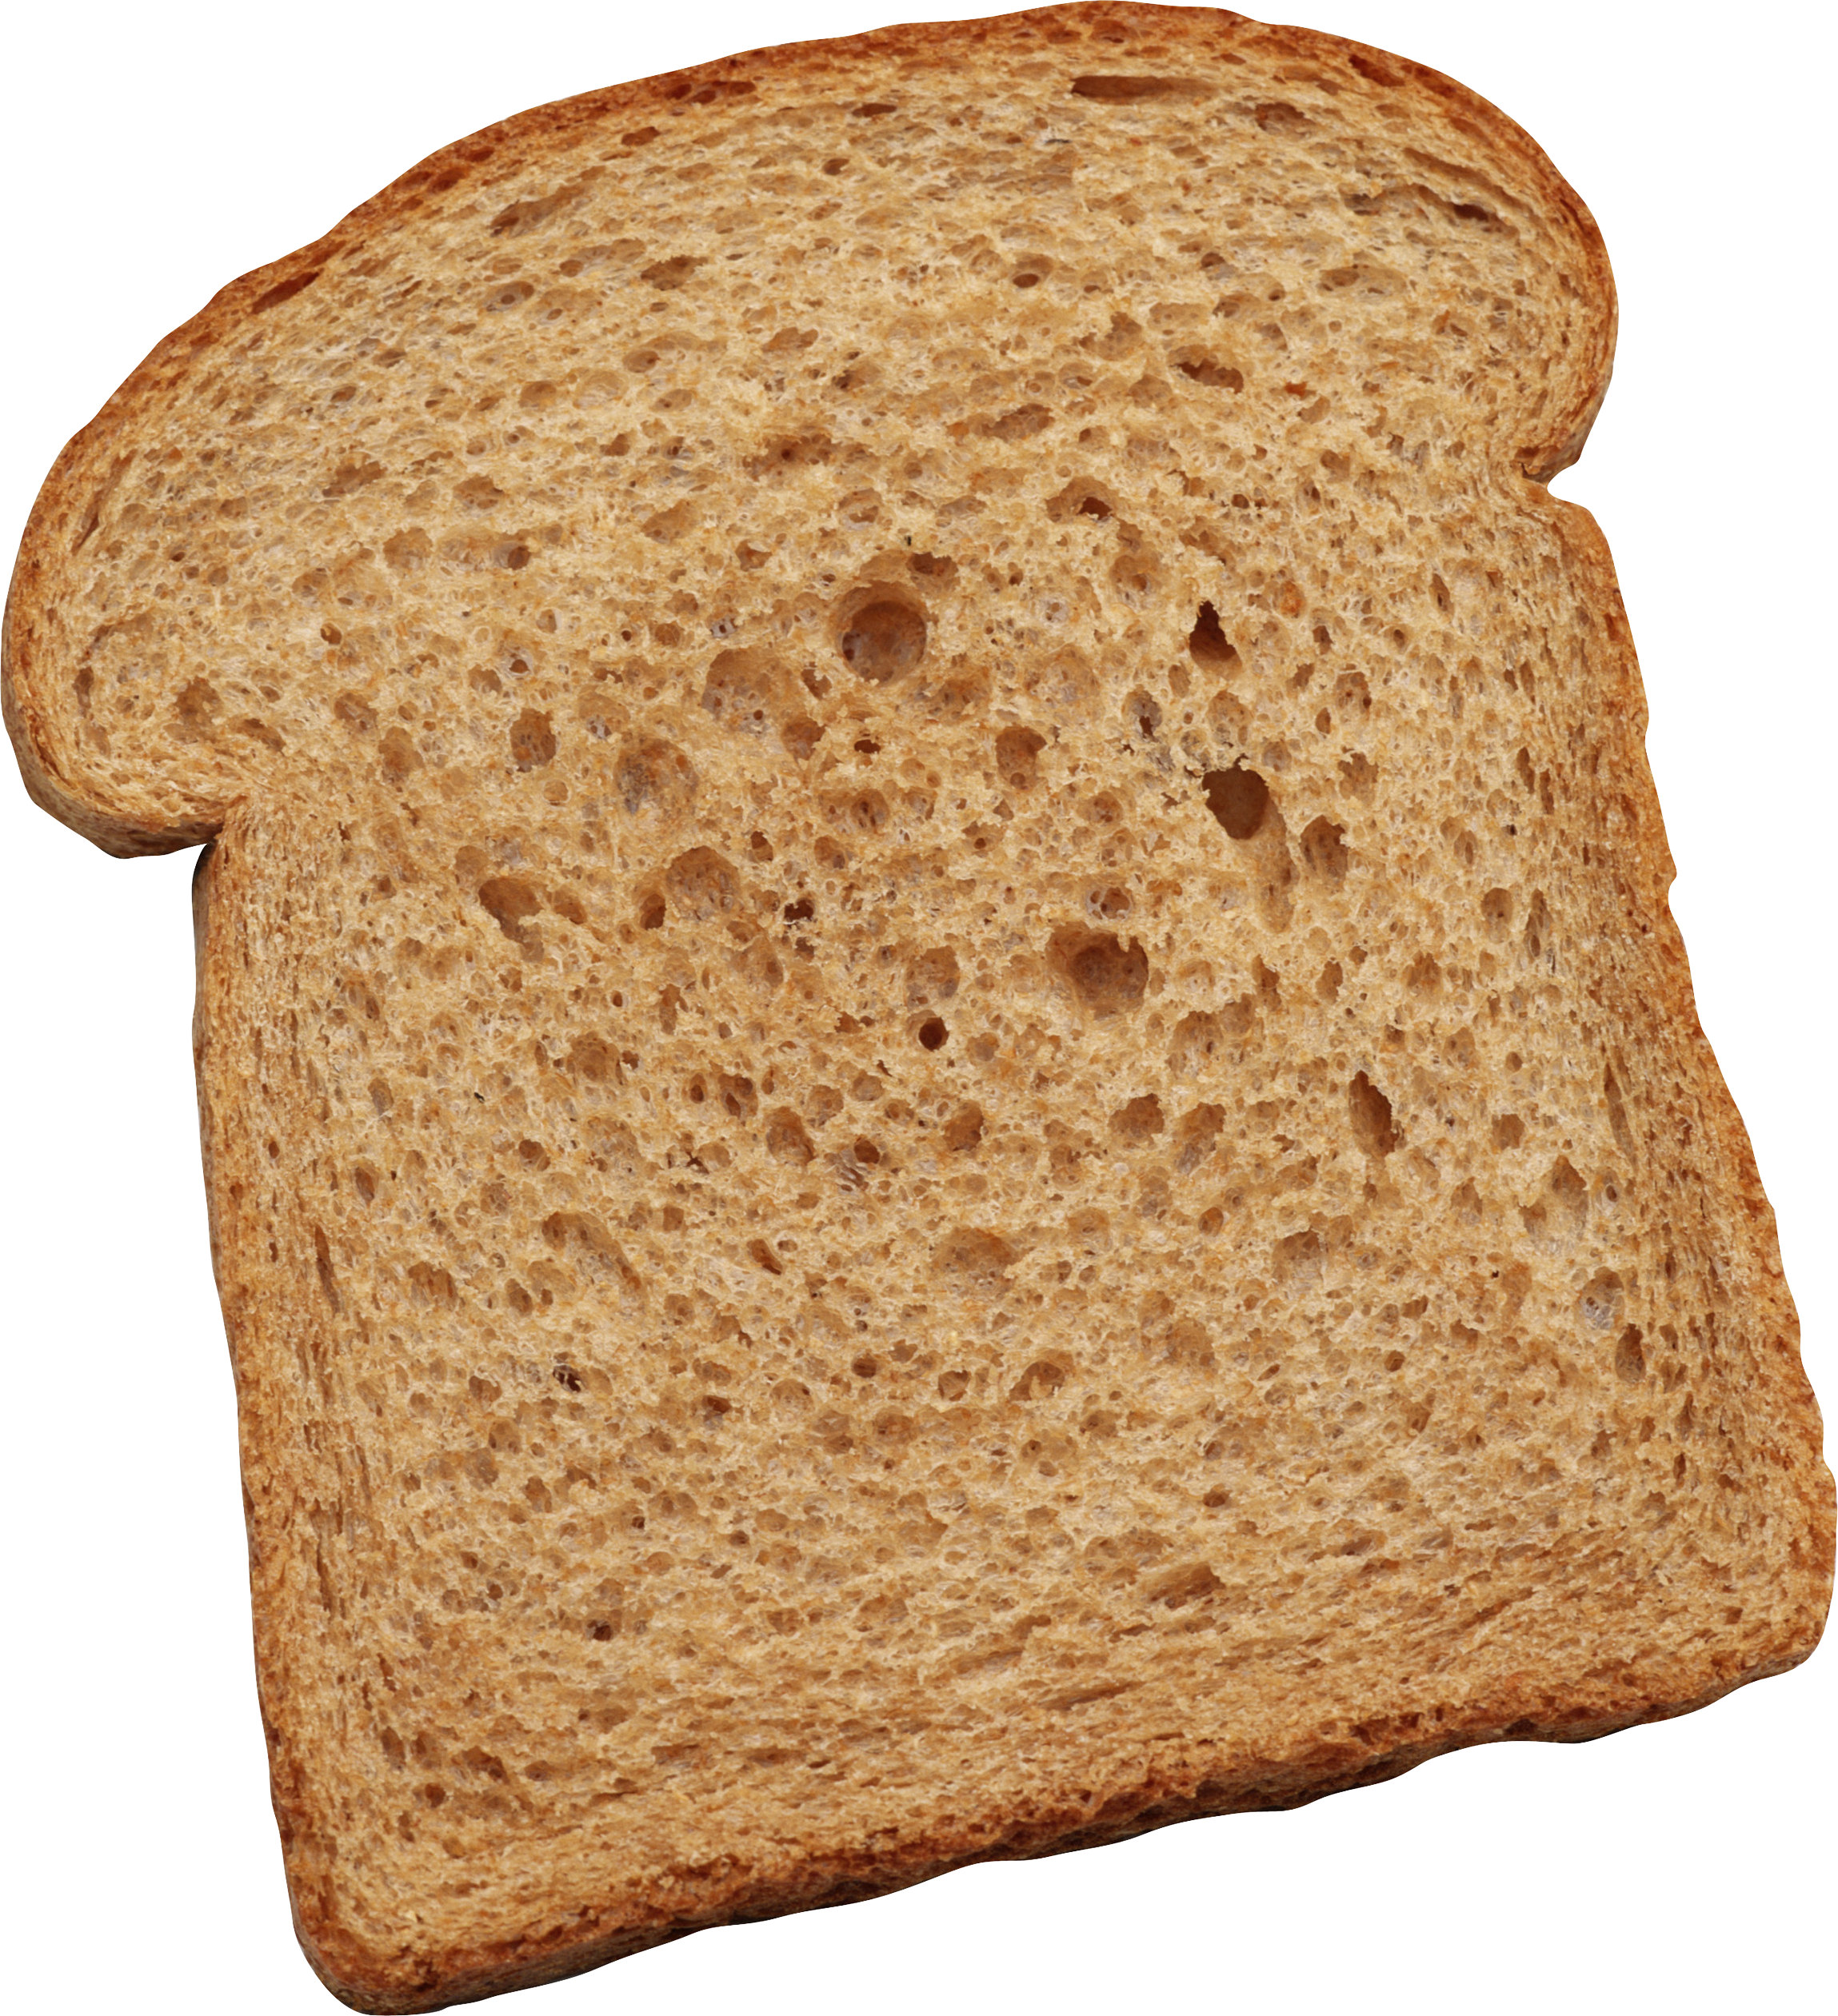 Toast PNG Image